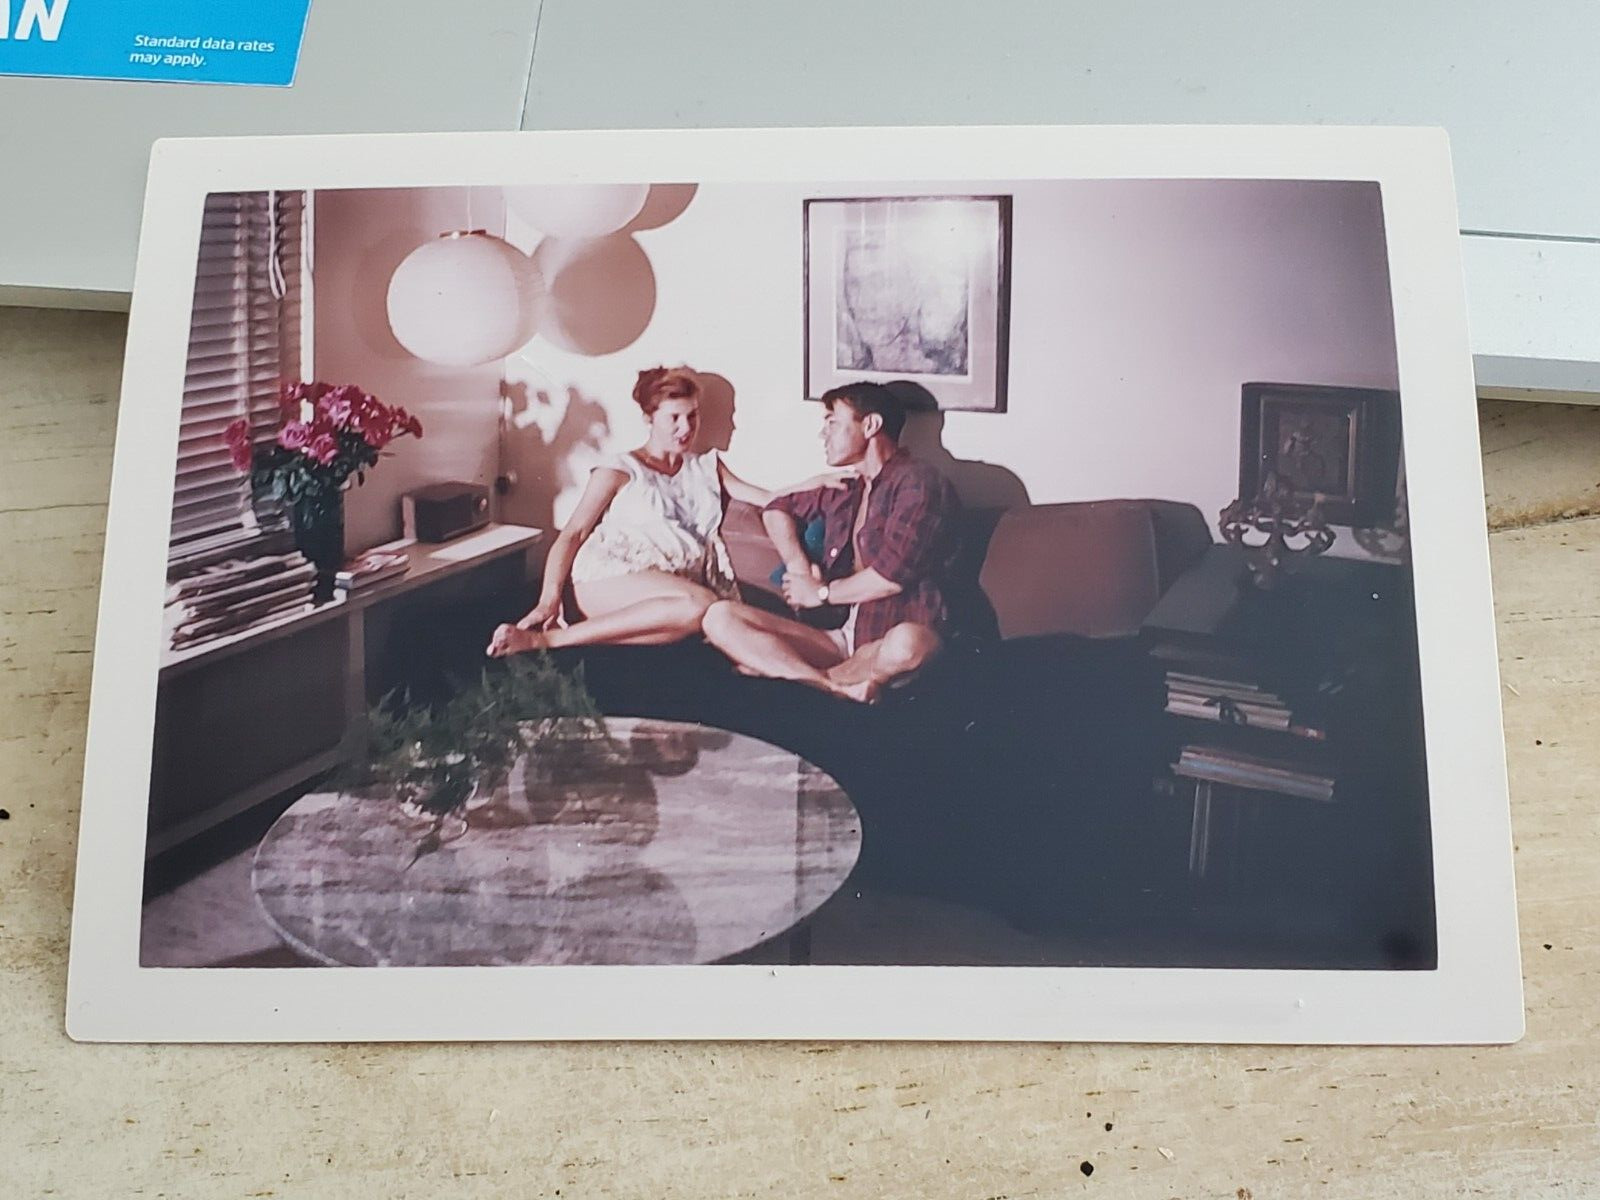 1957 CANDID PHOTO OF YOUNG COUPLE IN MCM HOME WOMAN IN BABYDOLL LINGERIE LEGS